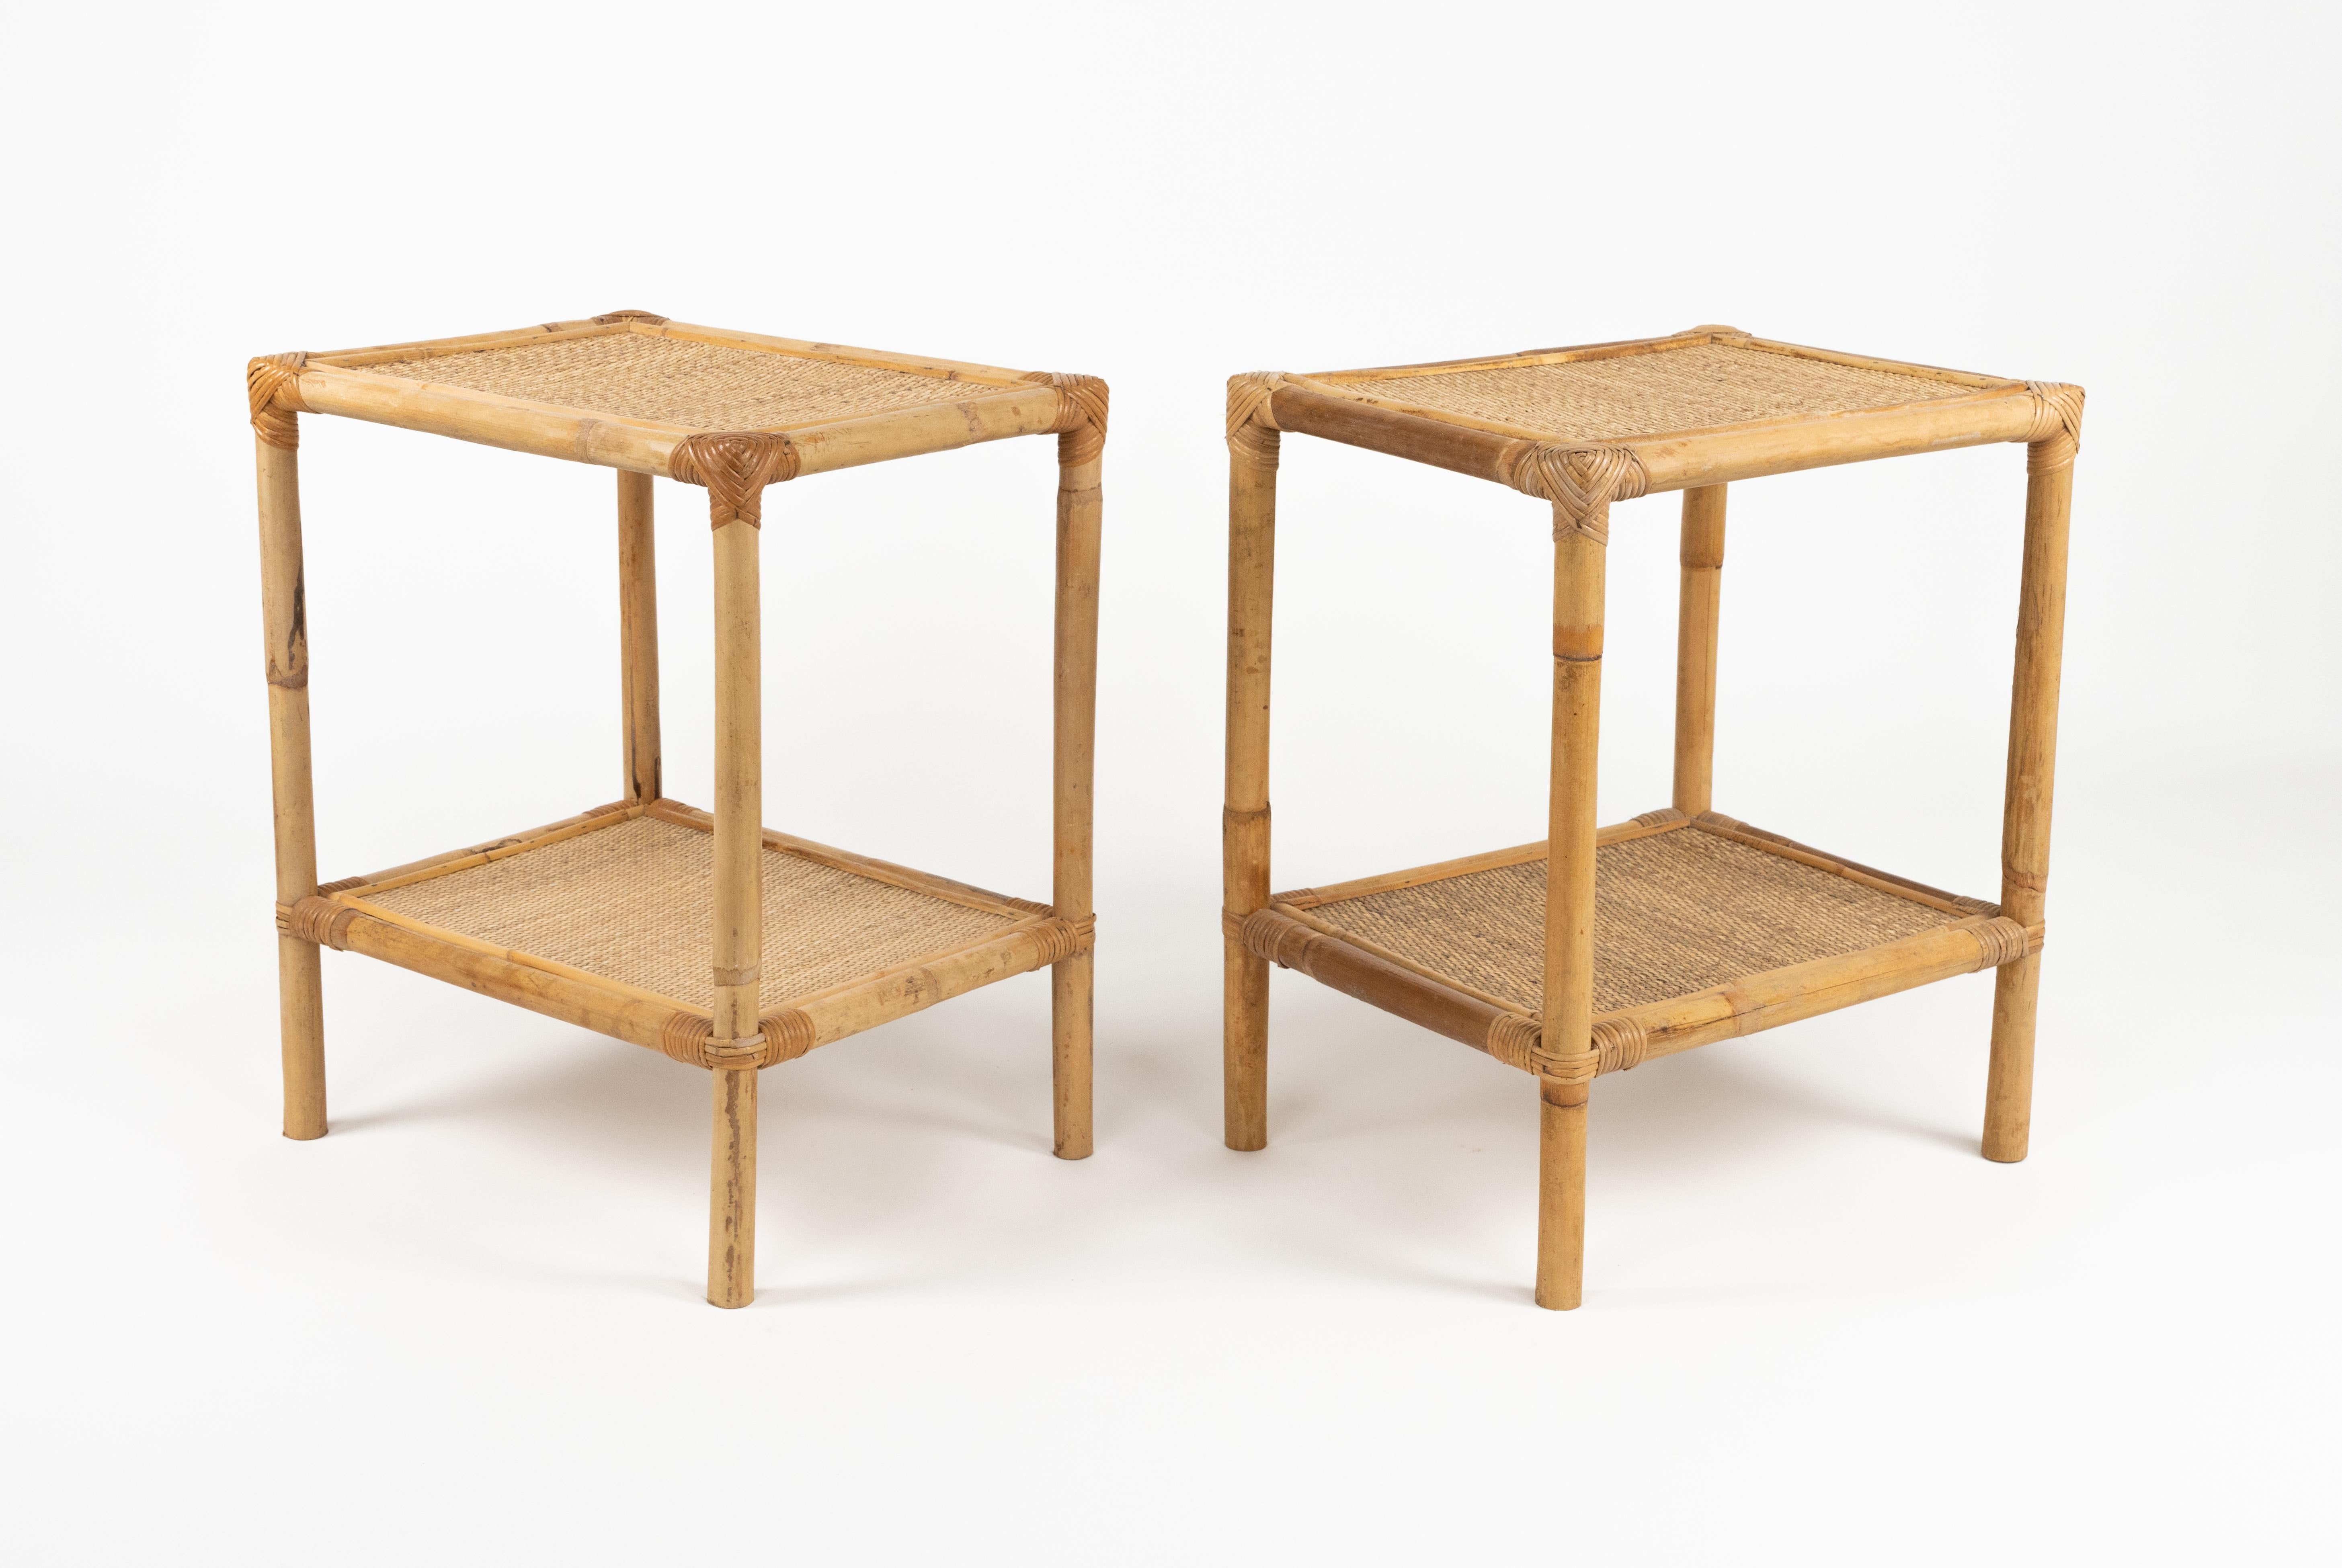 Midcentury Pair of Bed Side Tables in Bamboo, Rattan & Wicker, Italy 1970s For Sale 3